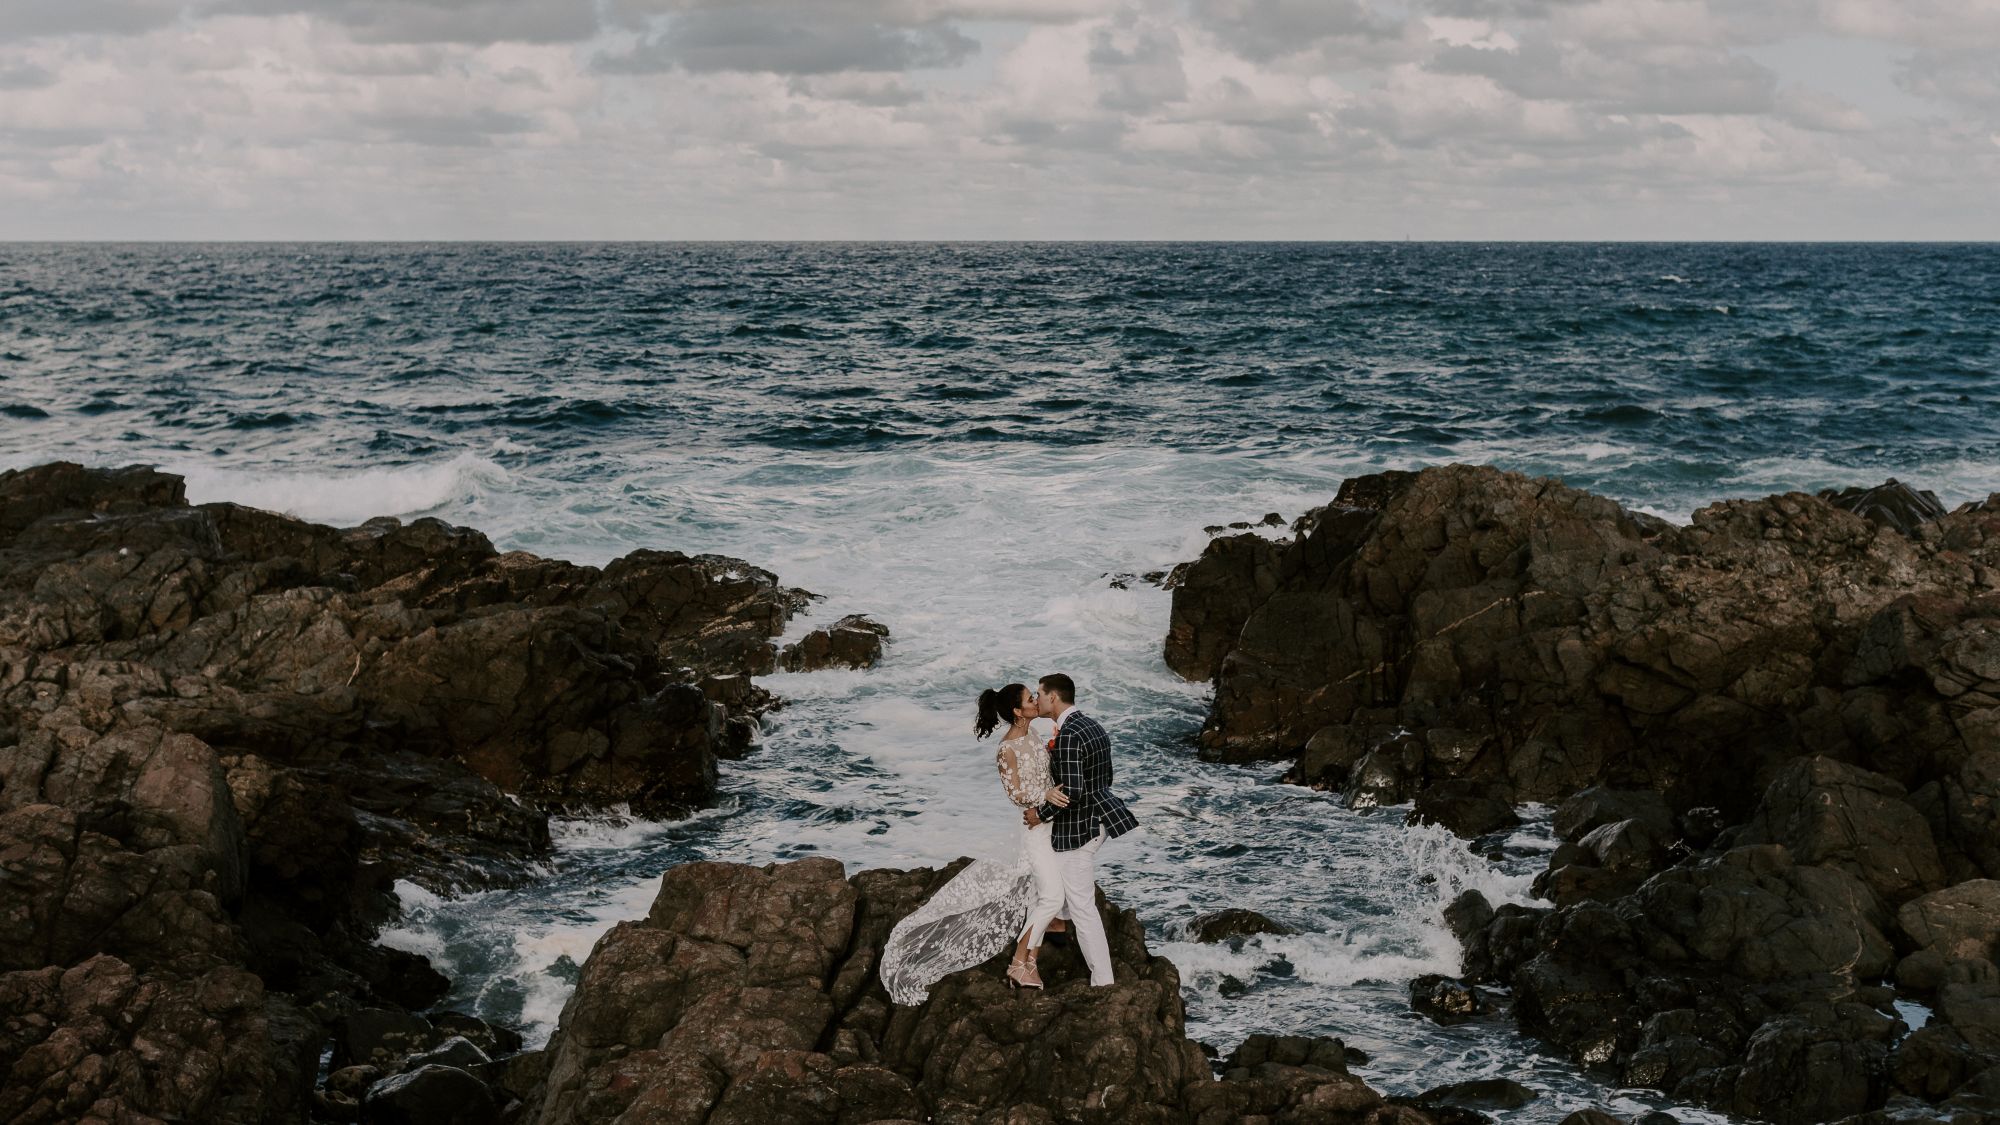 Newlywed couple kissing on the rocks next to sea.